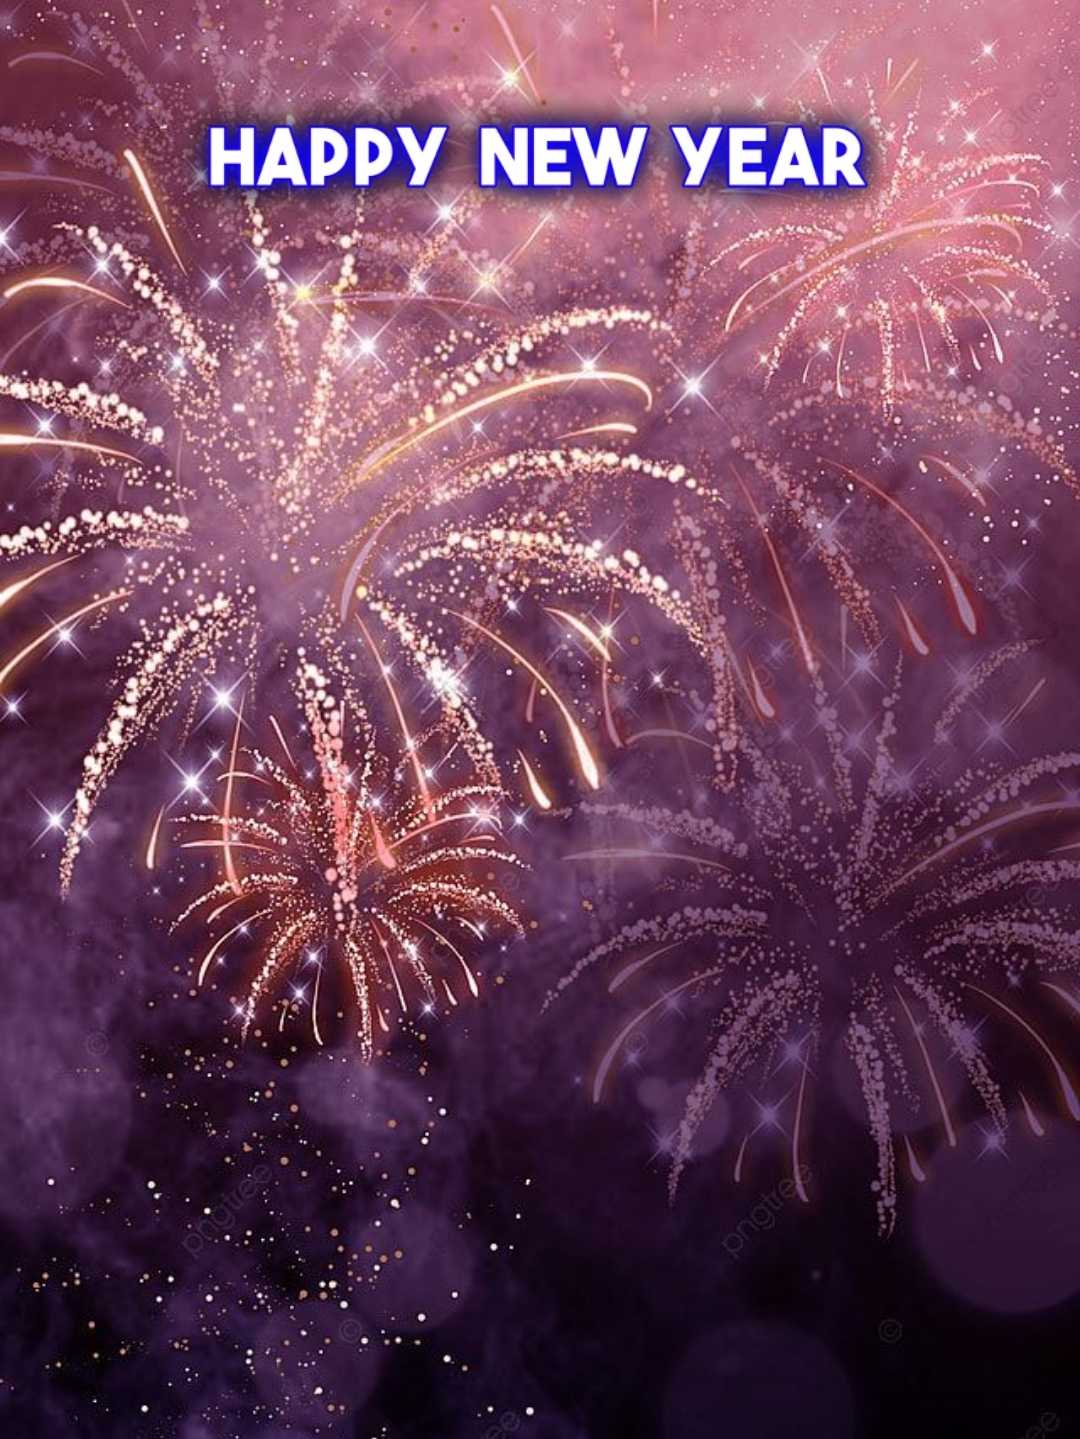 New year background for picsart